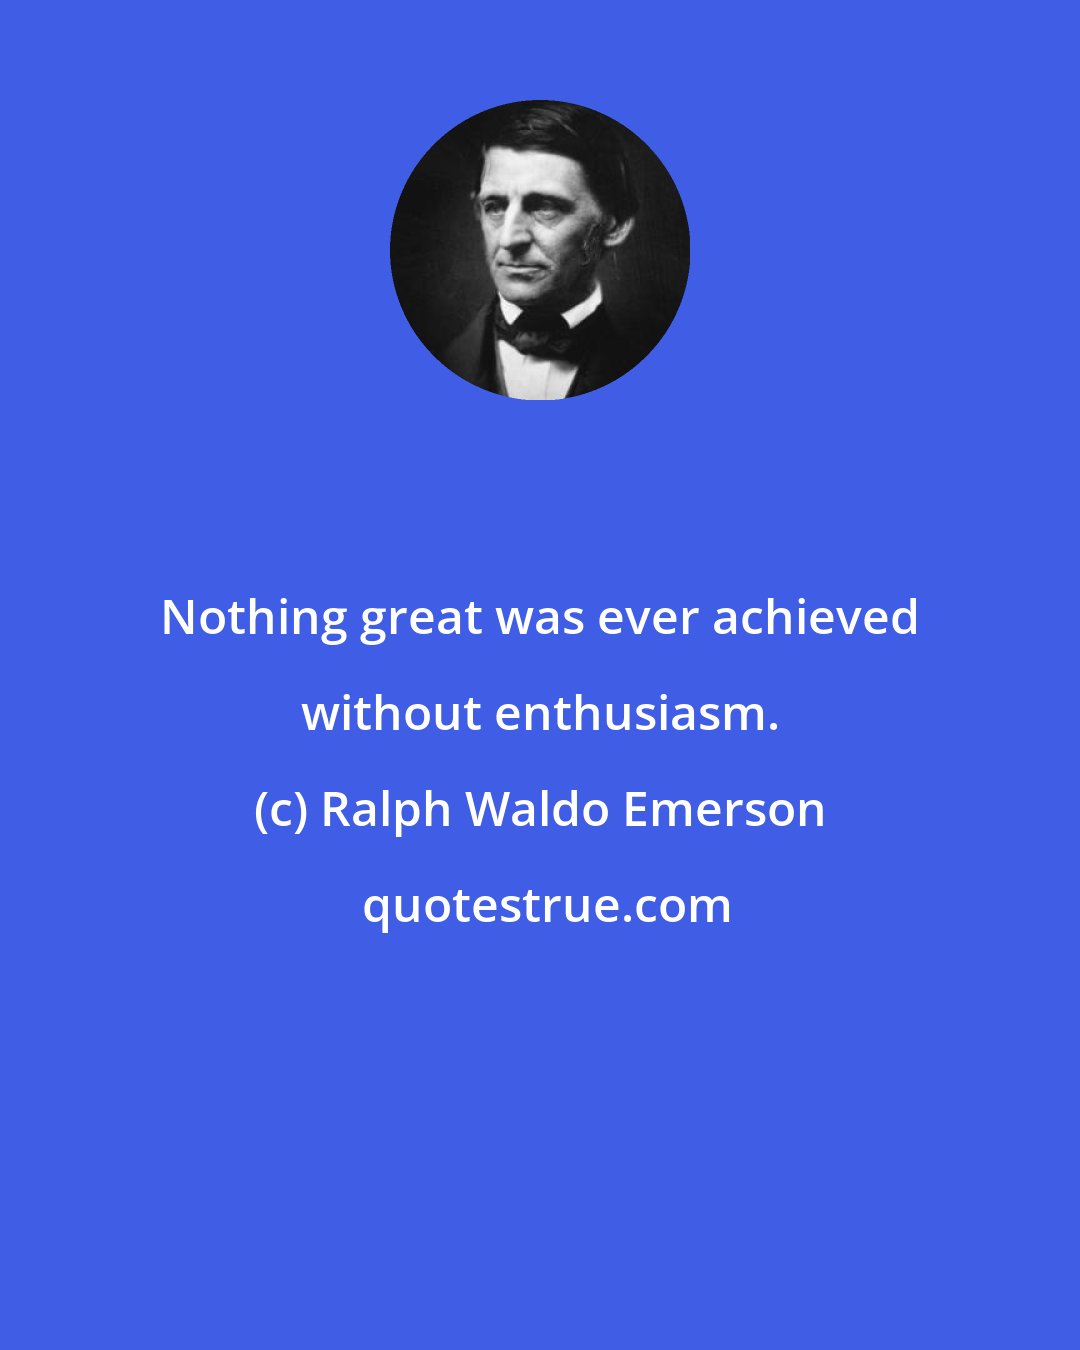 Ralph Waldo Emerson: Nothing great was ever achieved without enthusiasm.